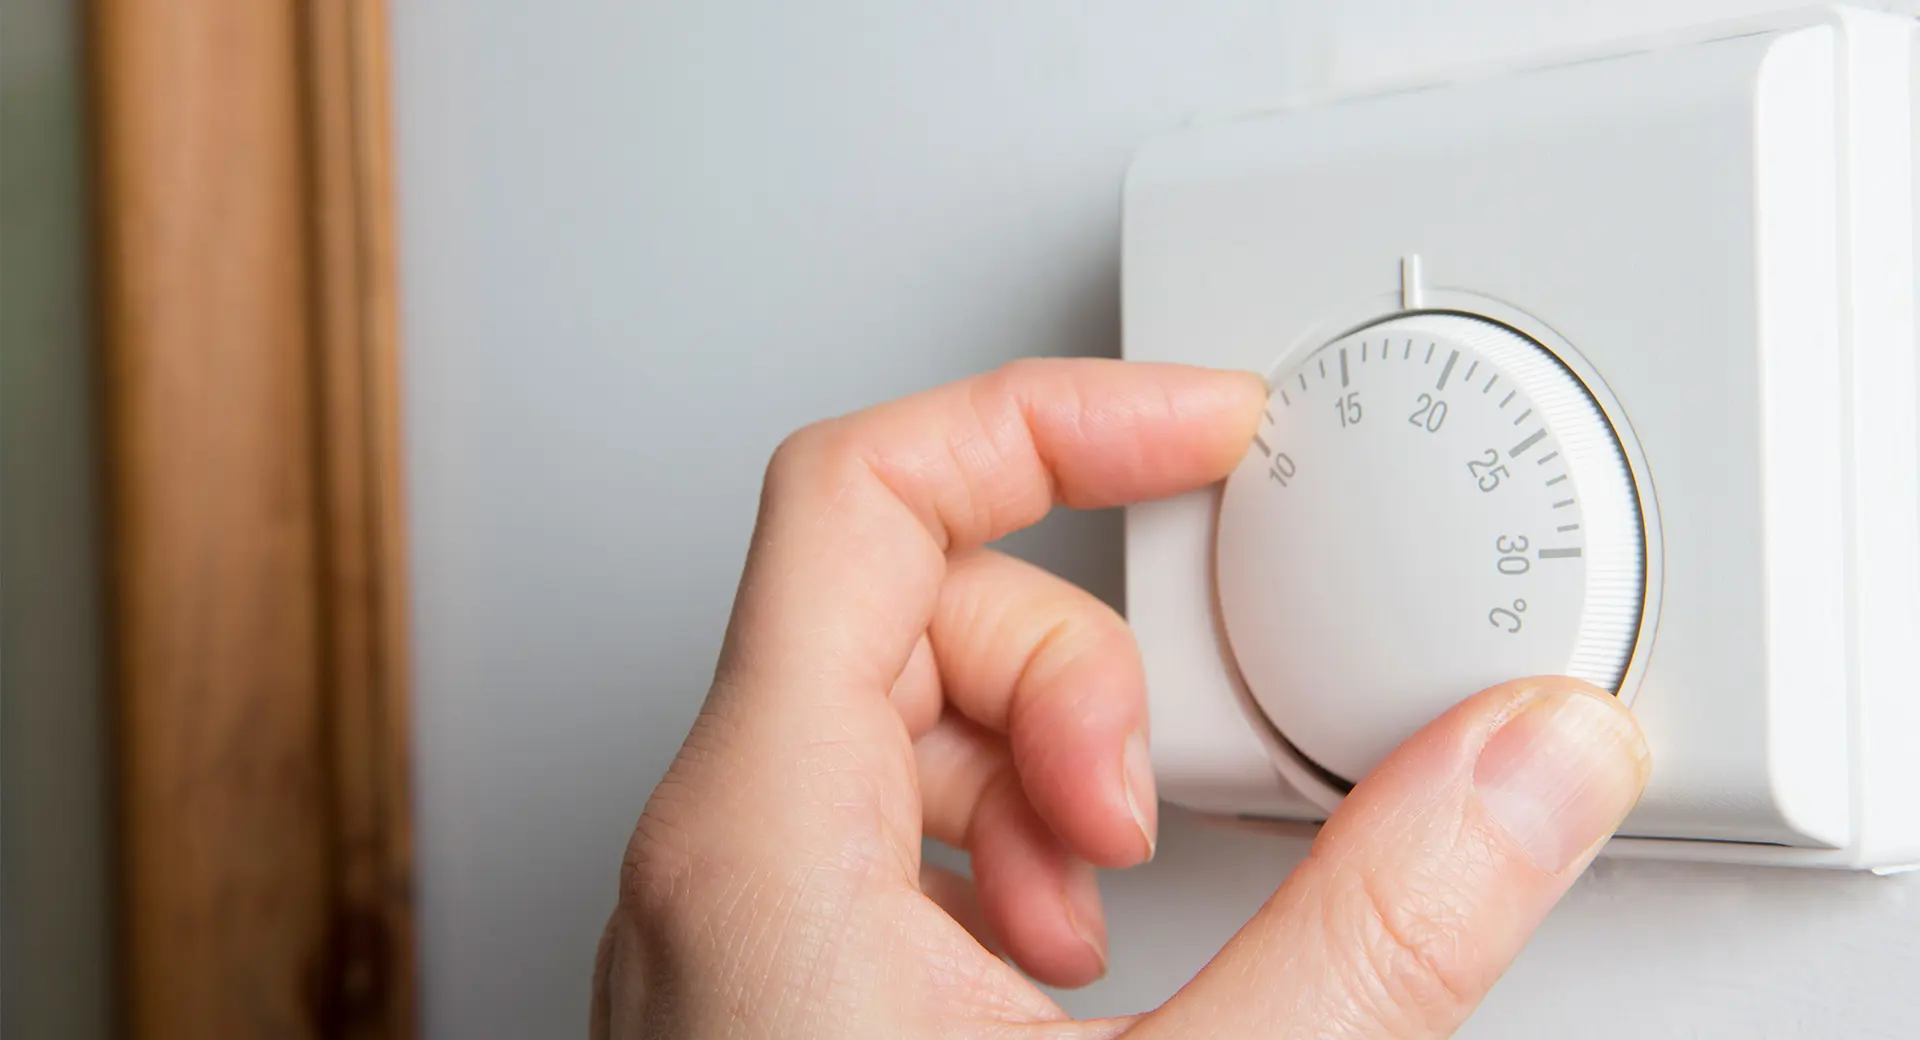 A person adjusting a thermostat